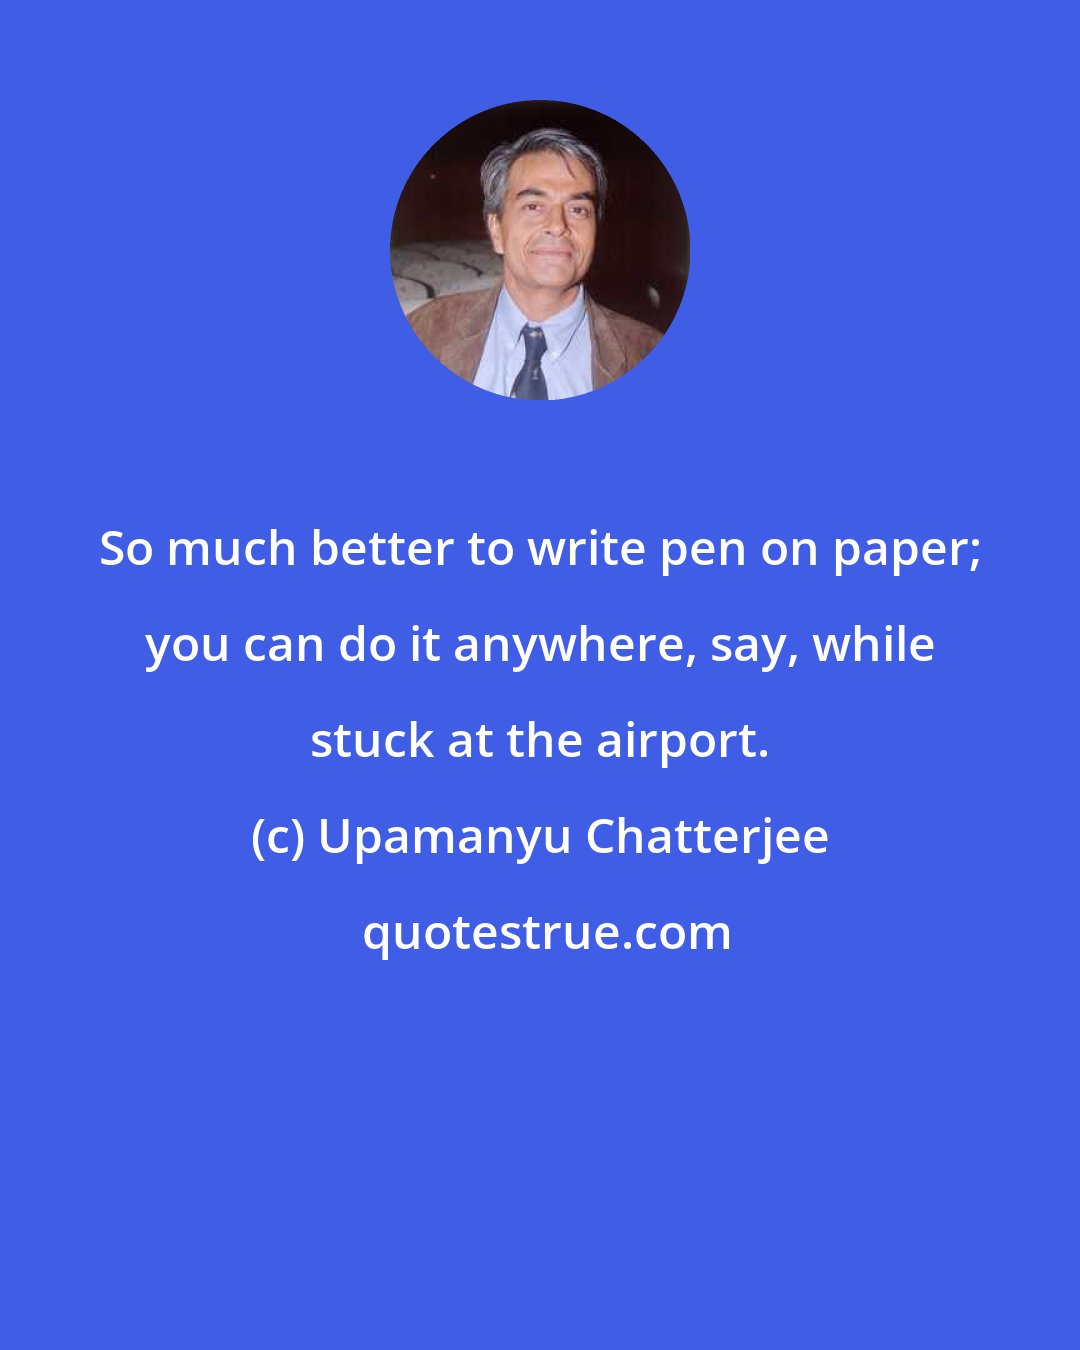 Upamanyu Chatterjee: So much better to write pen on paper; you can do it anywhere, say, while stuck at the airport.